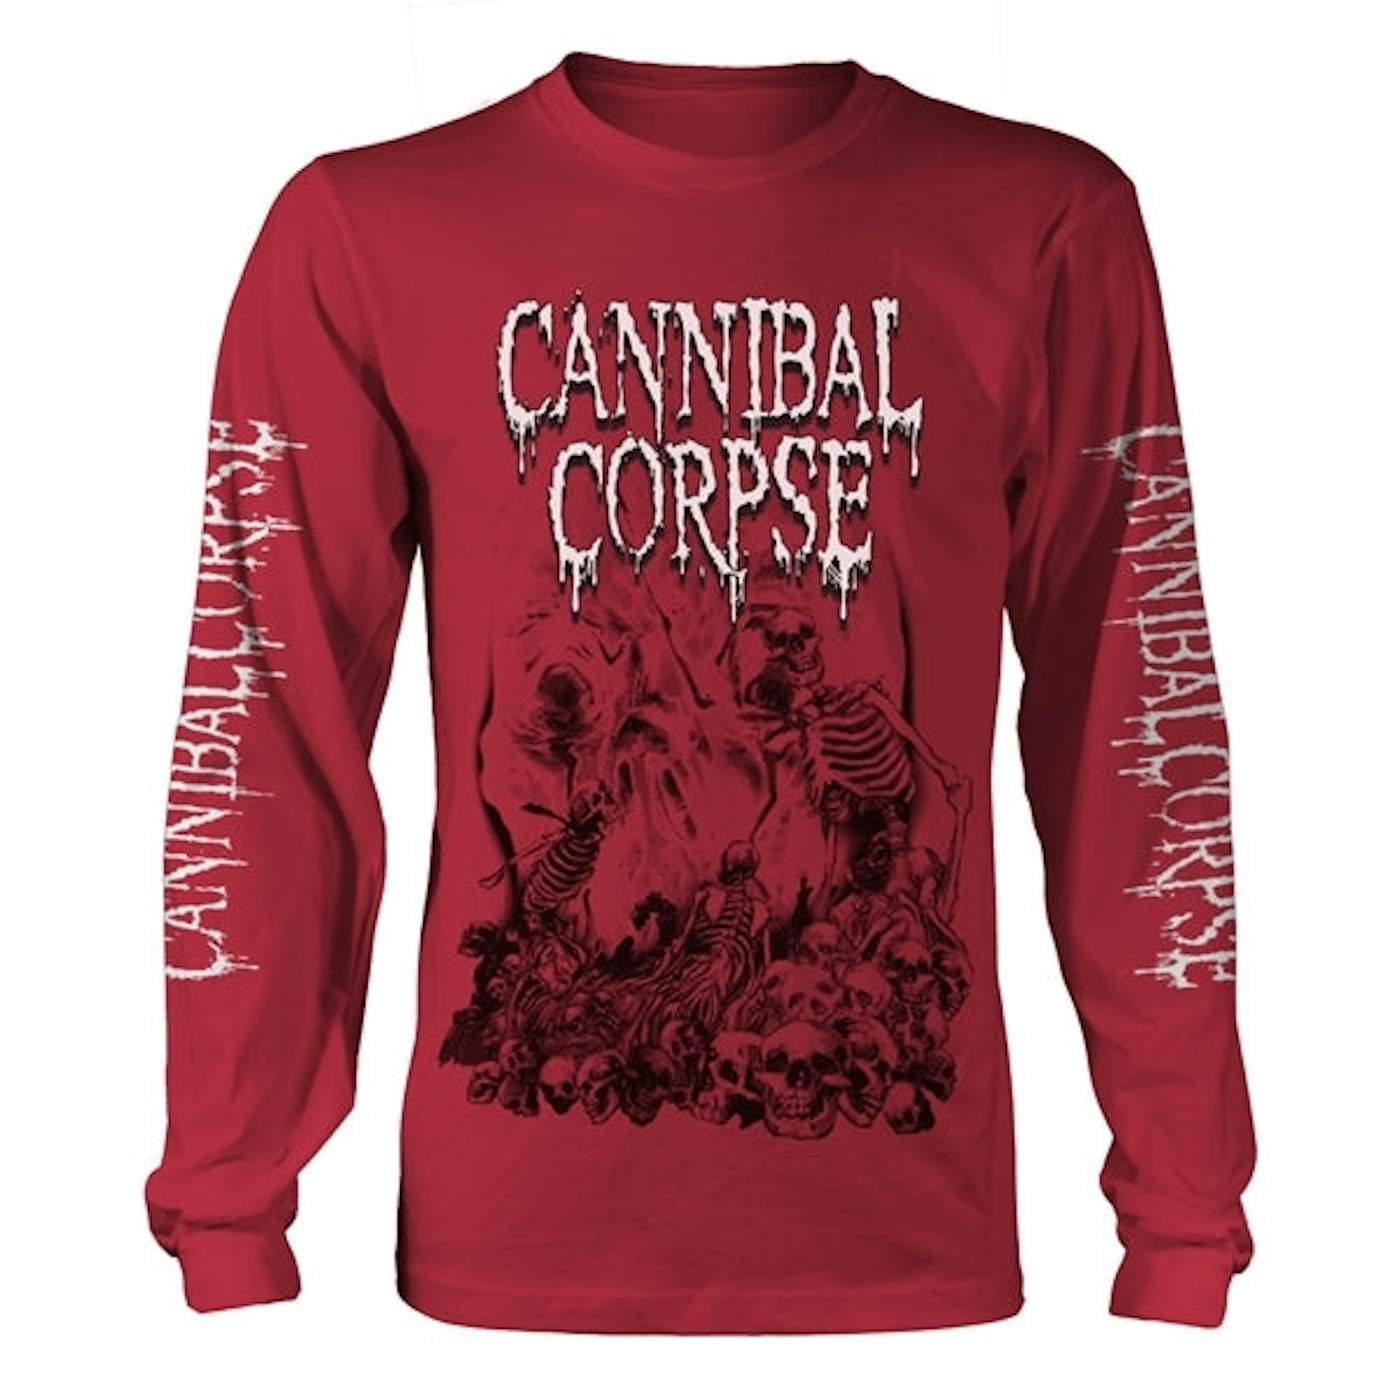 Cannibal Corpse Long Sleeve T Shirt - Pile Of Skulls 2018 (Red)